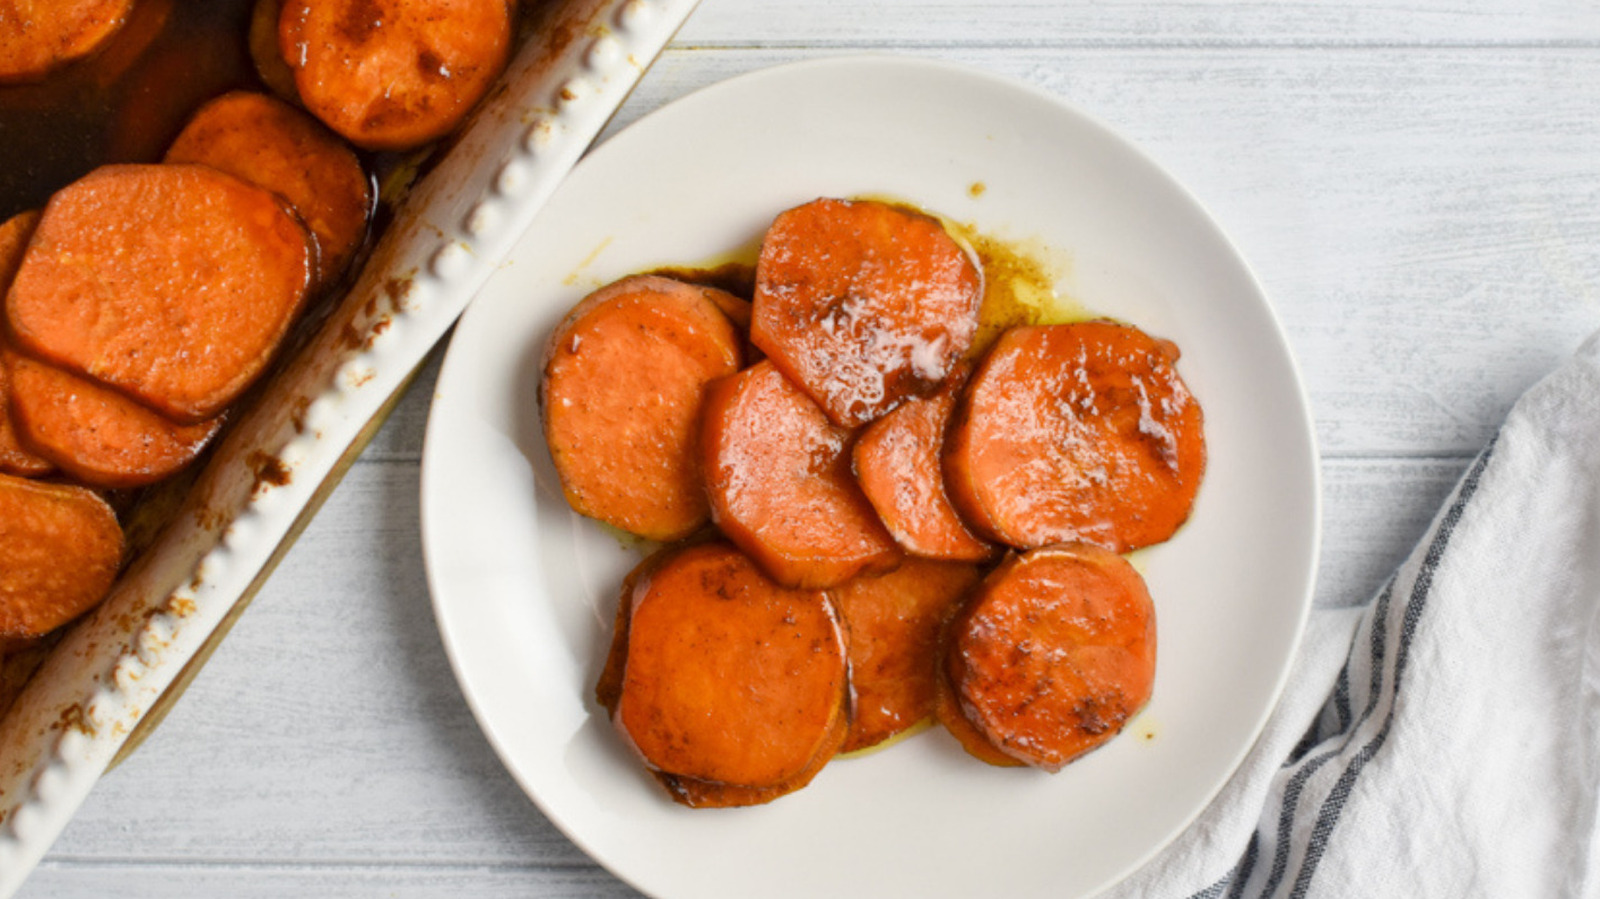 Easy Candied Yams  from Somewhat Simple